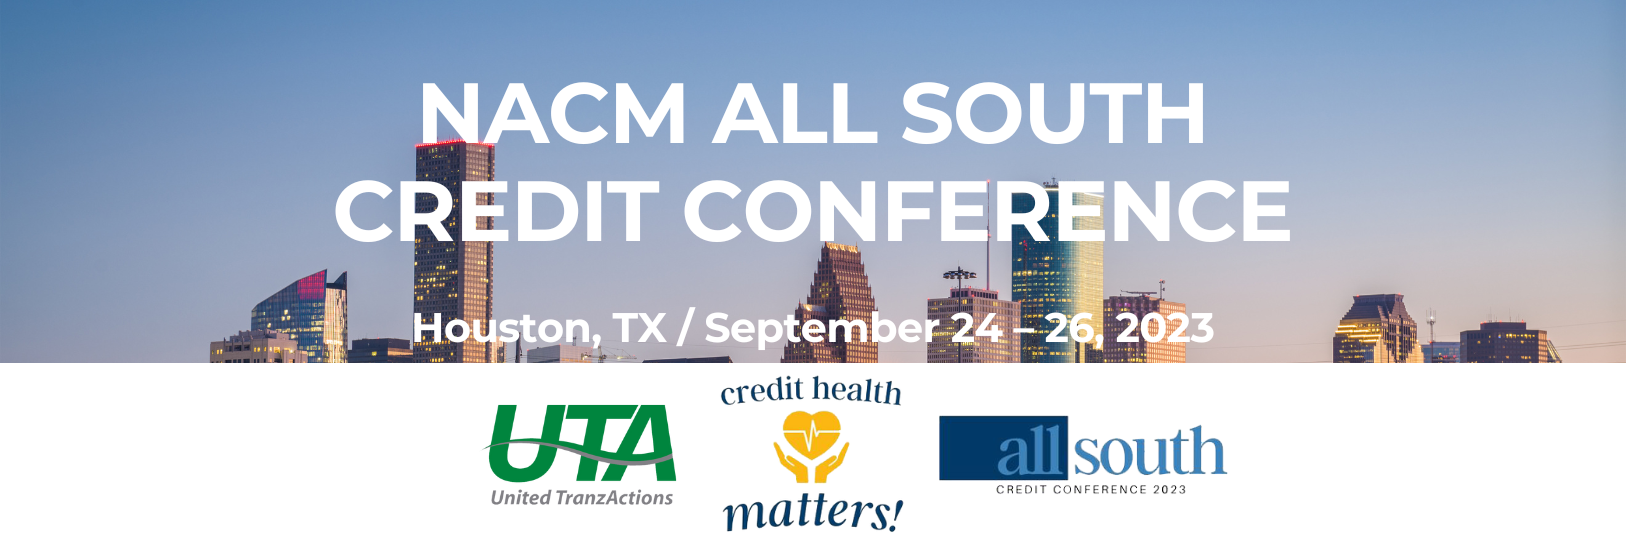 NACM All South Credit Conference - Houston, TX September 24 – 26, 2023